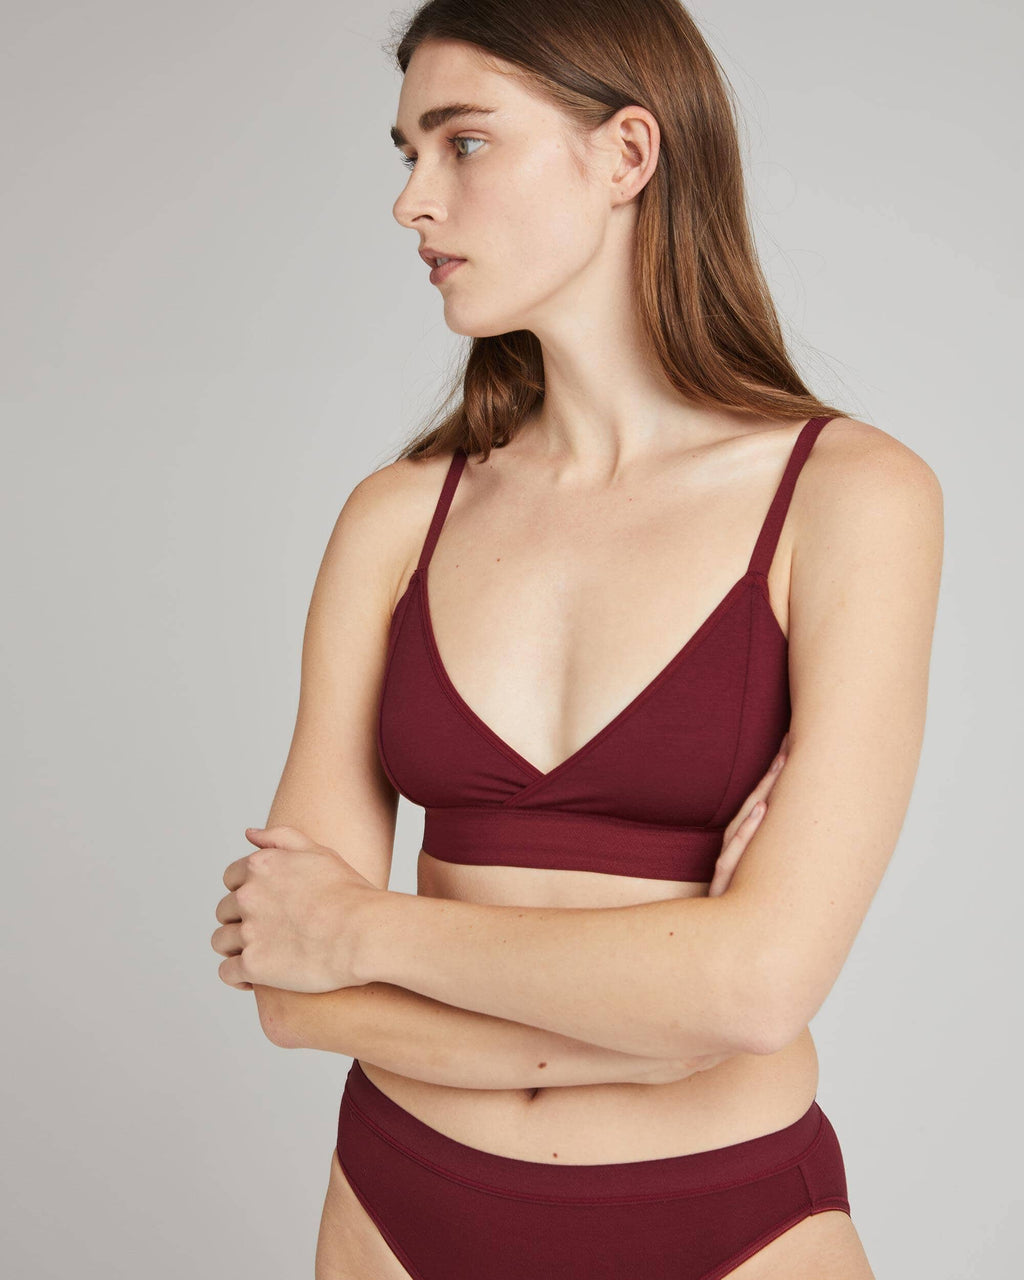 Richer Poorer classic bralette latte brown  Pipe and Row boutique Seattle  - PIPE AND ROW